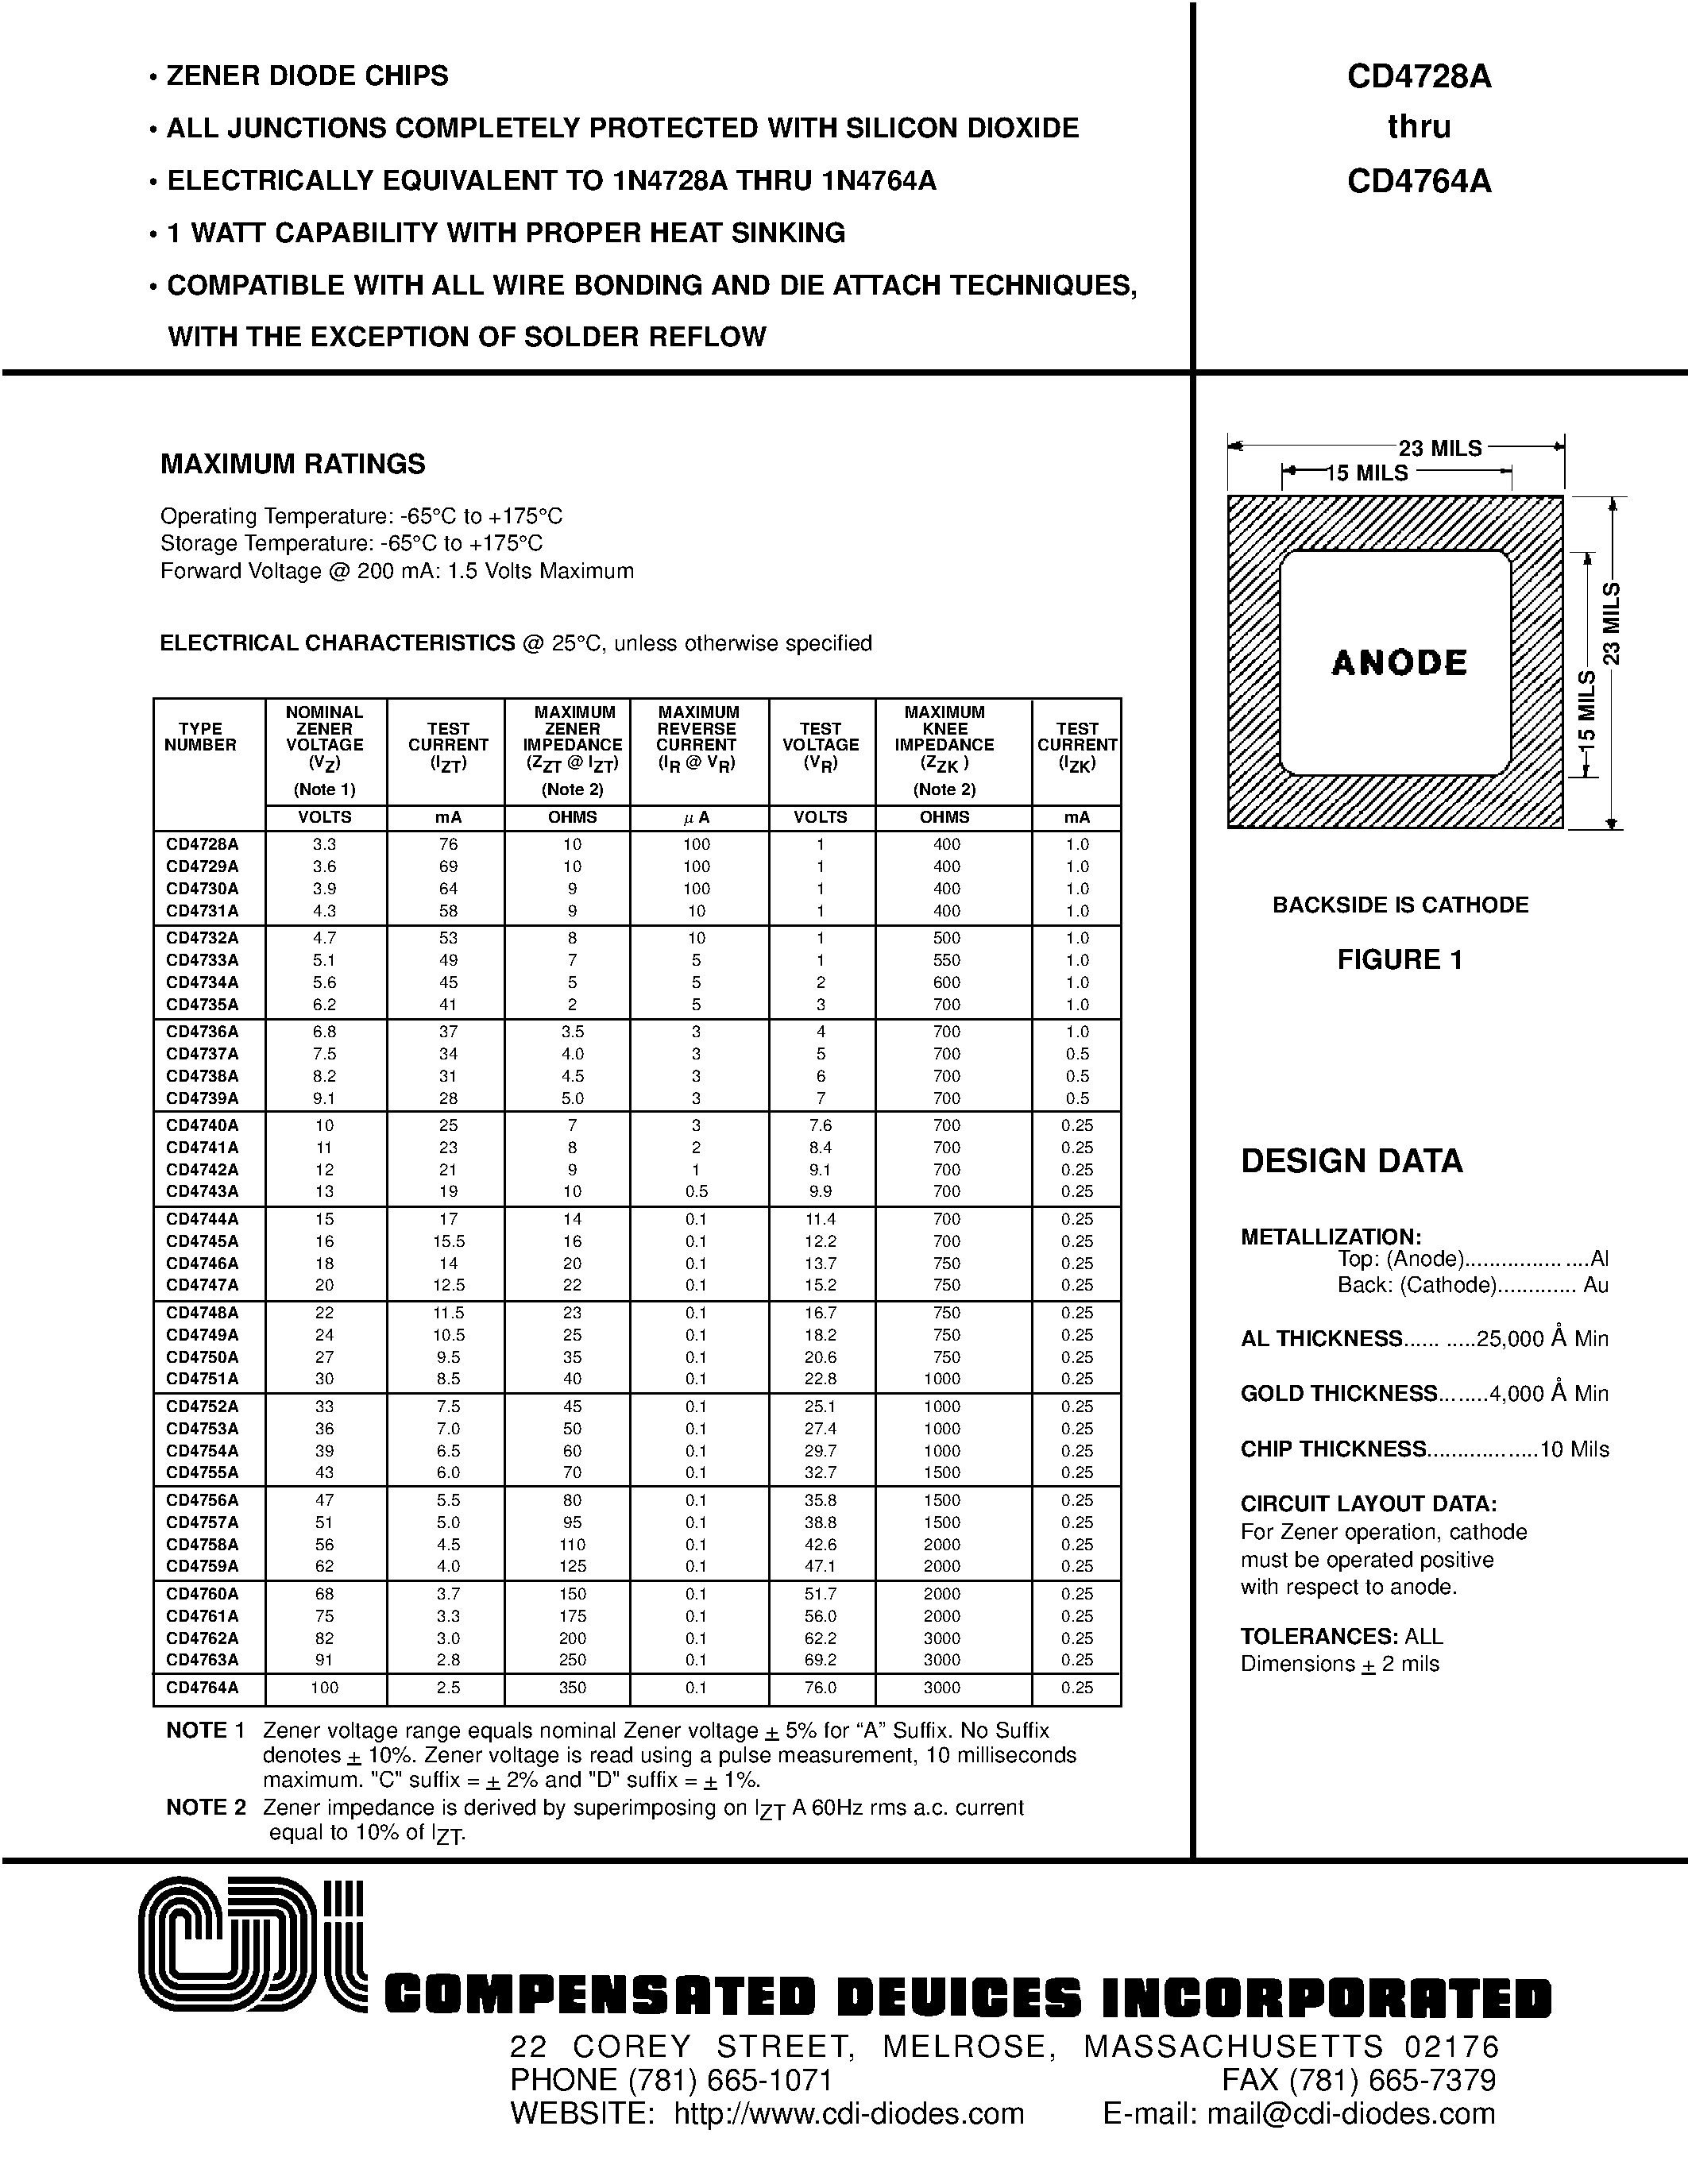 Datasheet CD4737A - ZENER DIODE CHIPS page 1